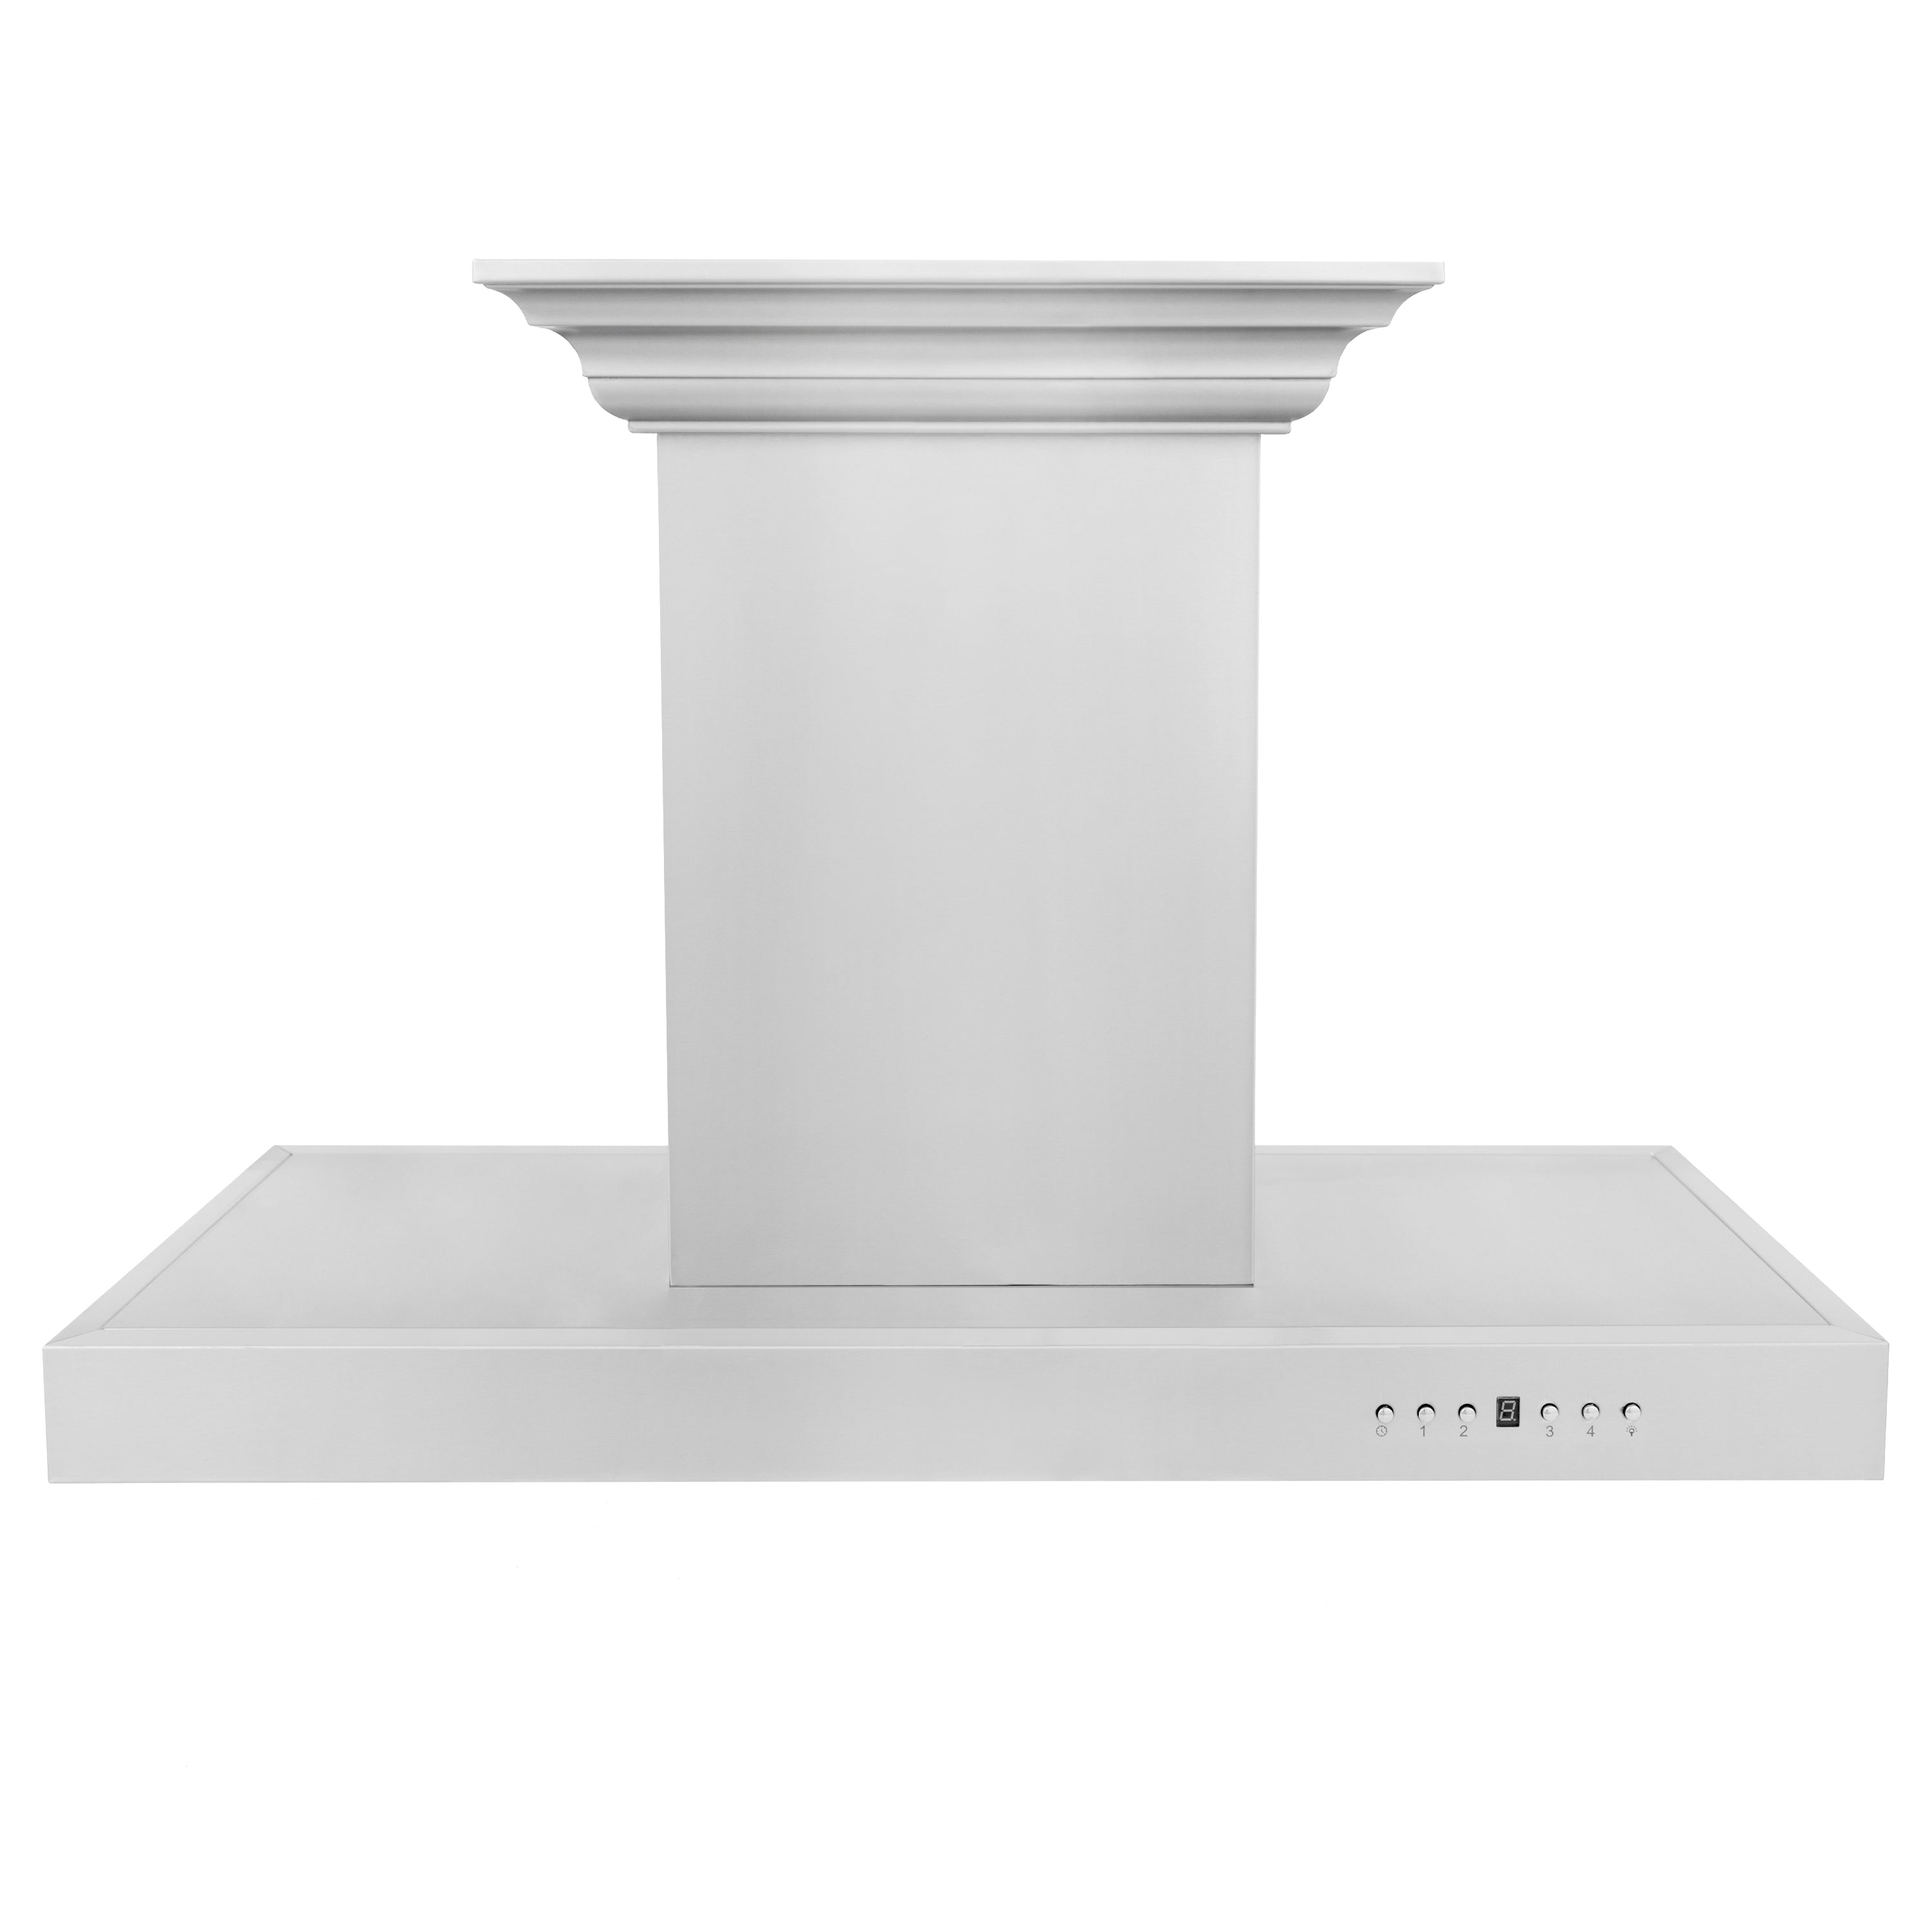 30" ZLINE CrownSound® Ducted Vent Island Mount Range Hood in Stainless Steel with Built-in Bluetooth Speakers (KE2iCRN-BT-30)